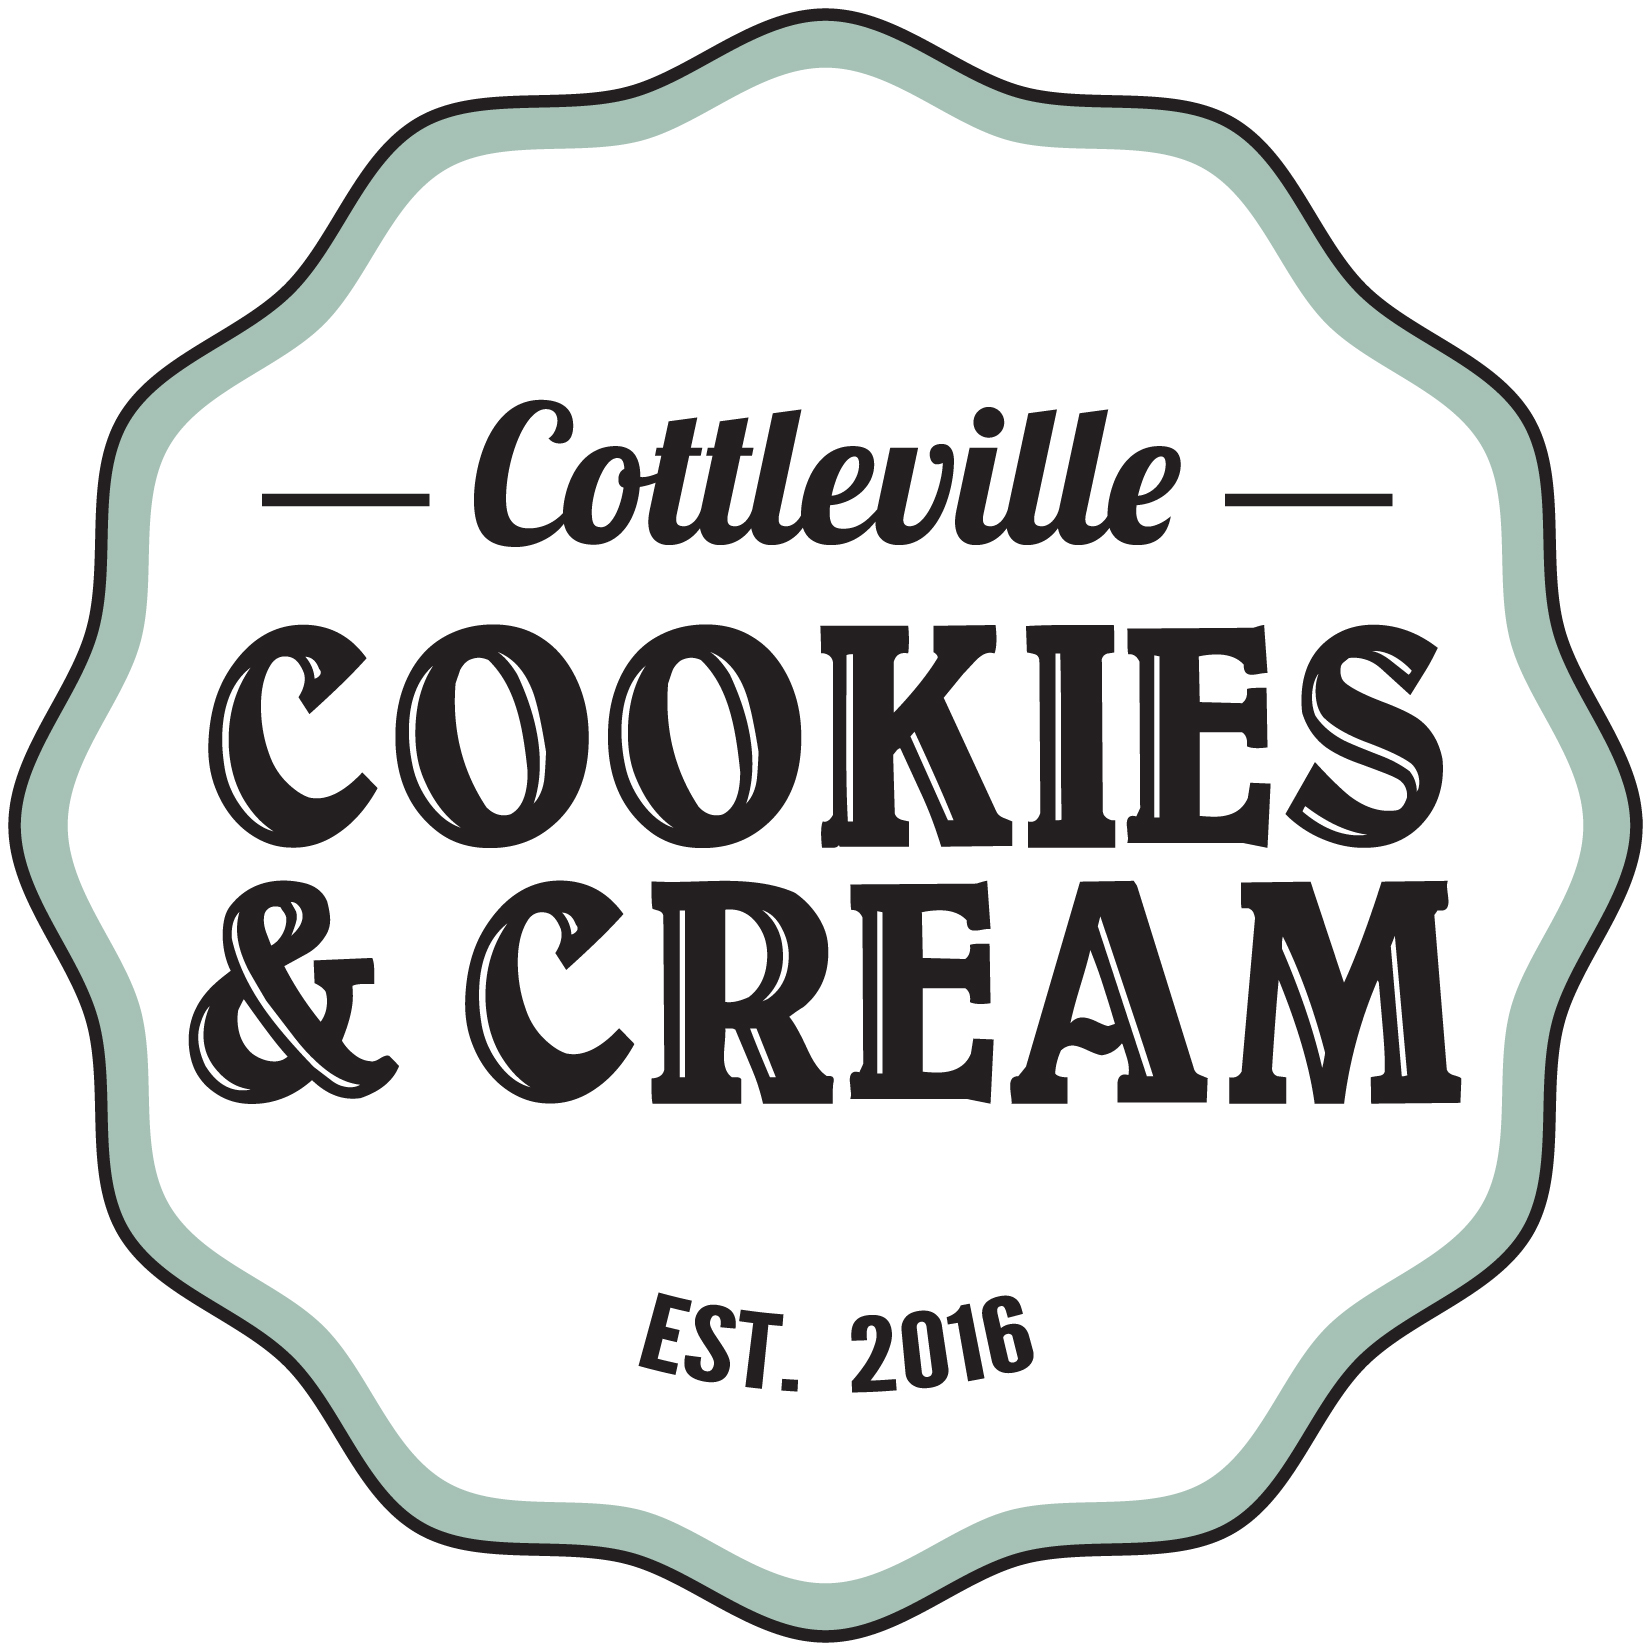 Cottleville Cookies and Cream